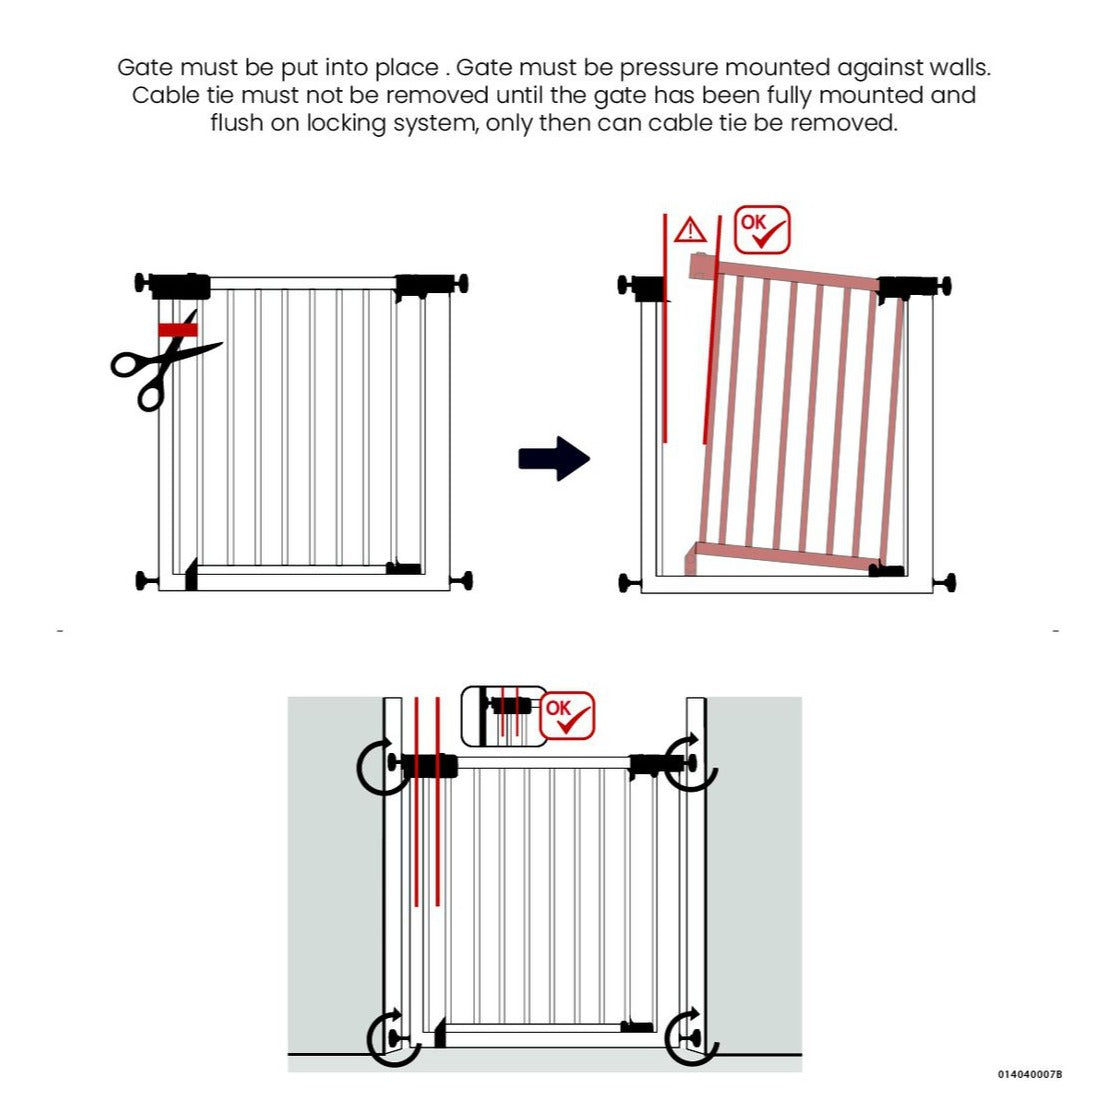 Safety First Auto Close Safety Gate